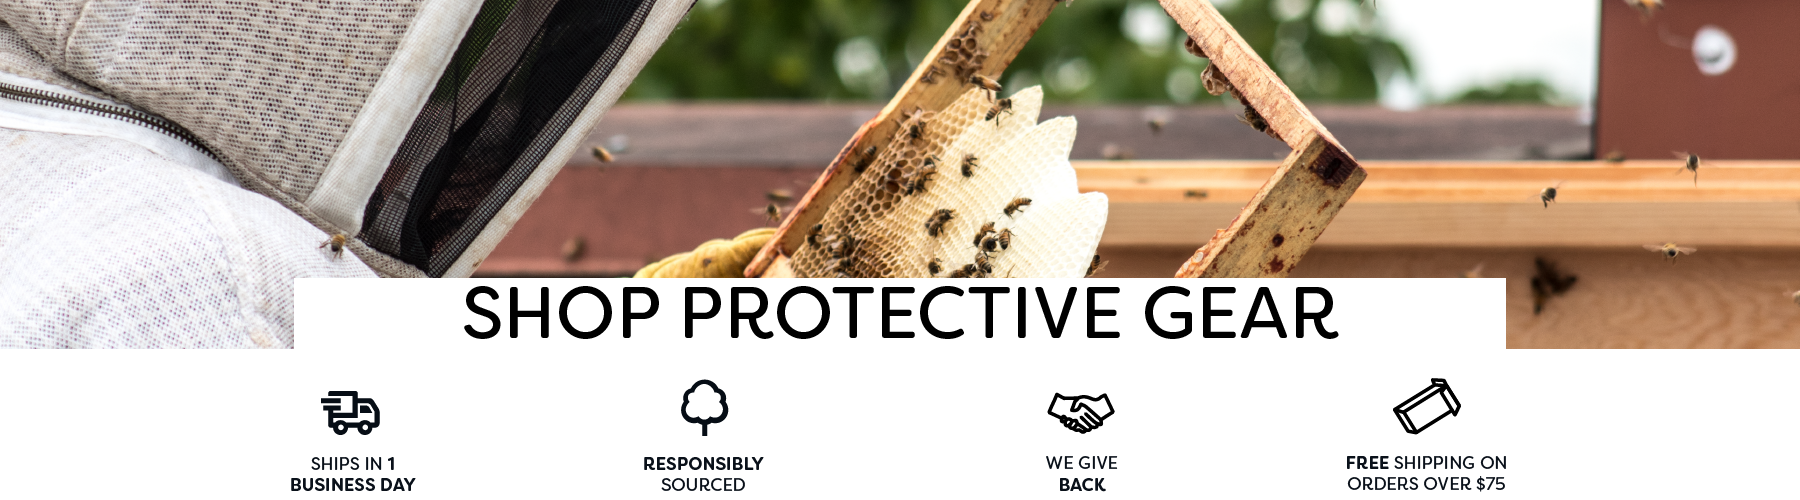 Protective beekeeping jackets, veils, ventilated jackets, and beekeeping gloves. Stay safe when managing your hives! Free shipping on orders over $75 to the contiguous 48 states.